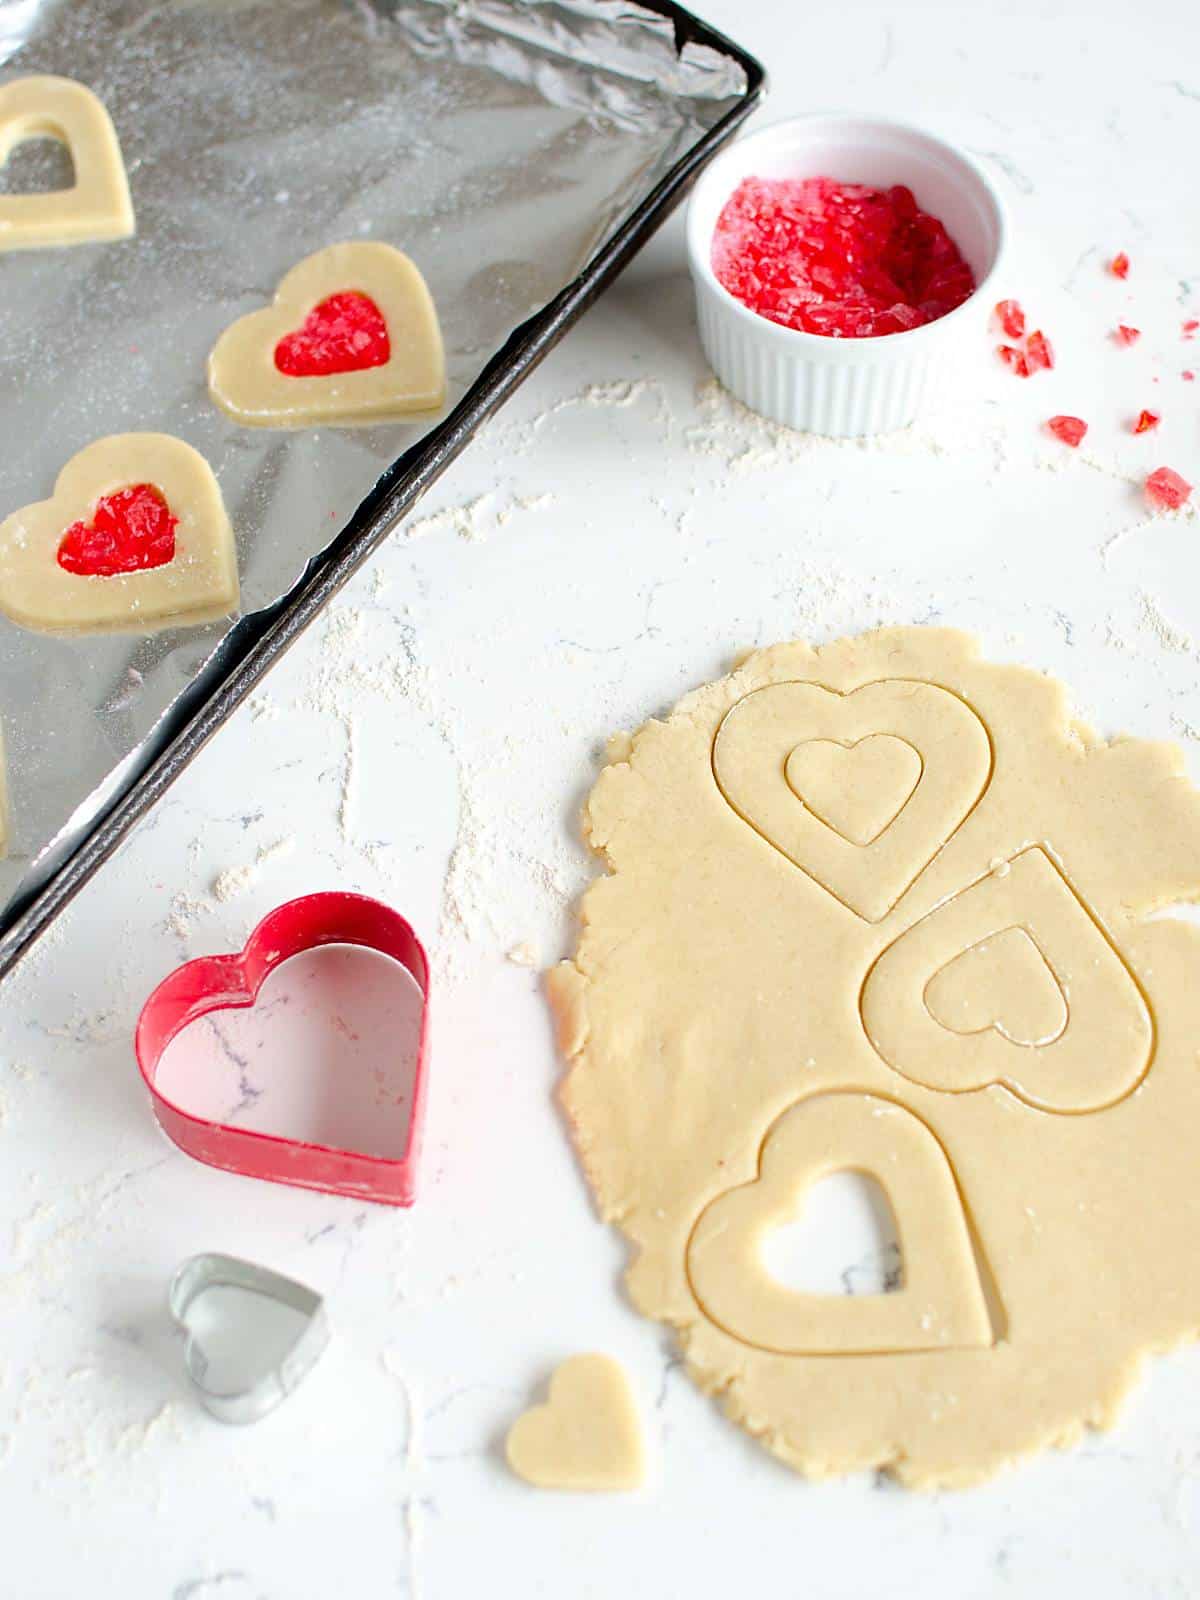 rolled cookie dough with heart shaped cookie cut outs, cookie cutters, and crushed red candy